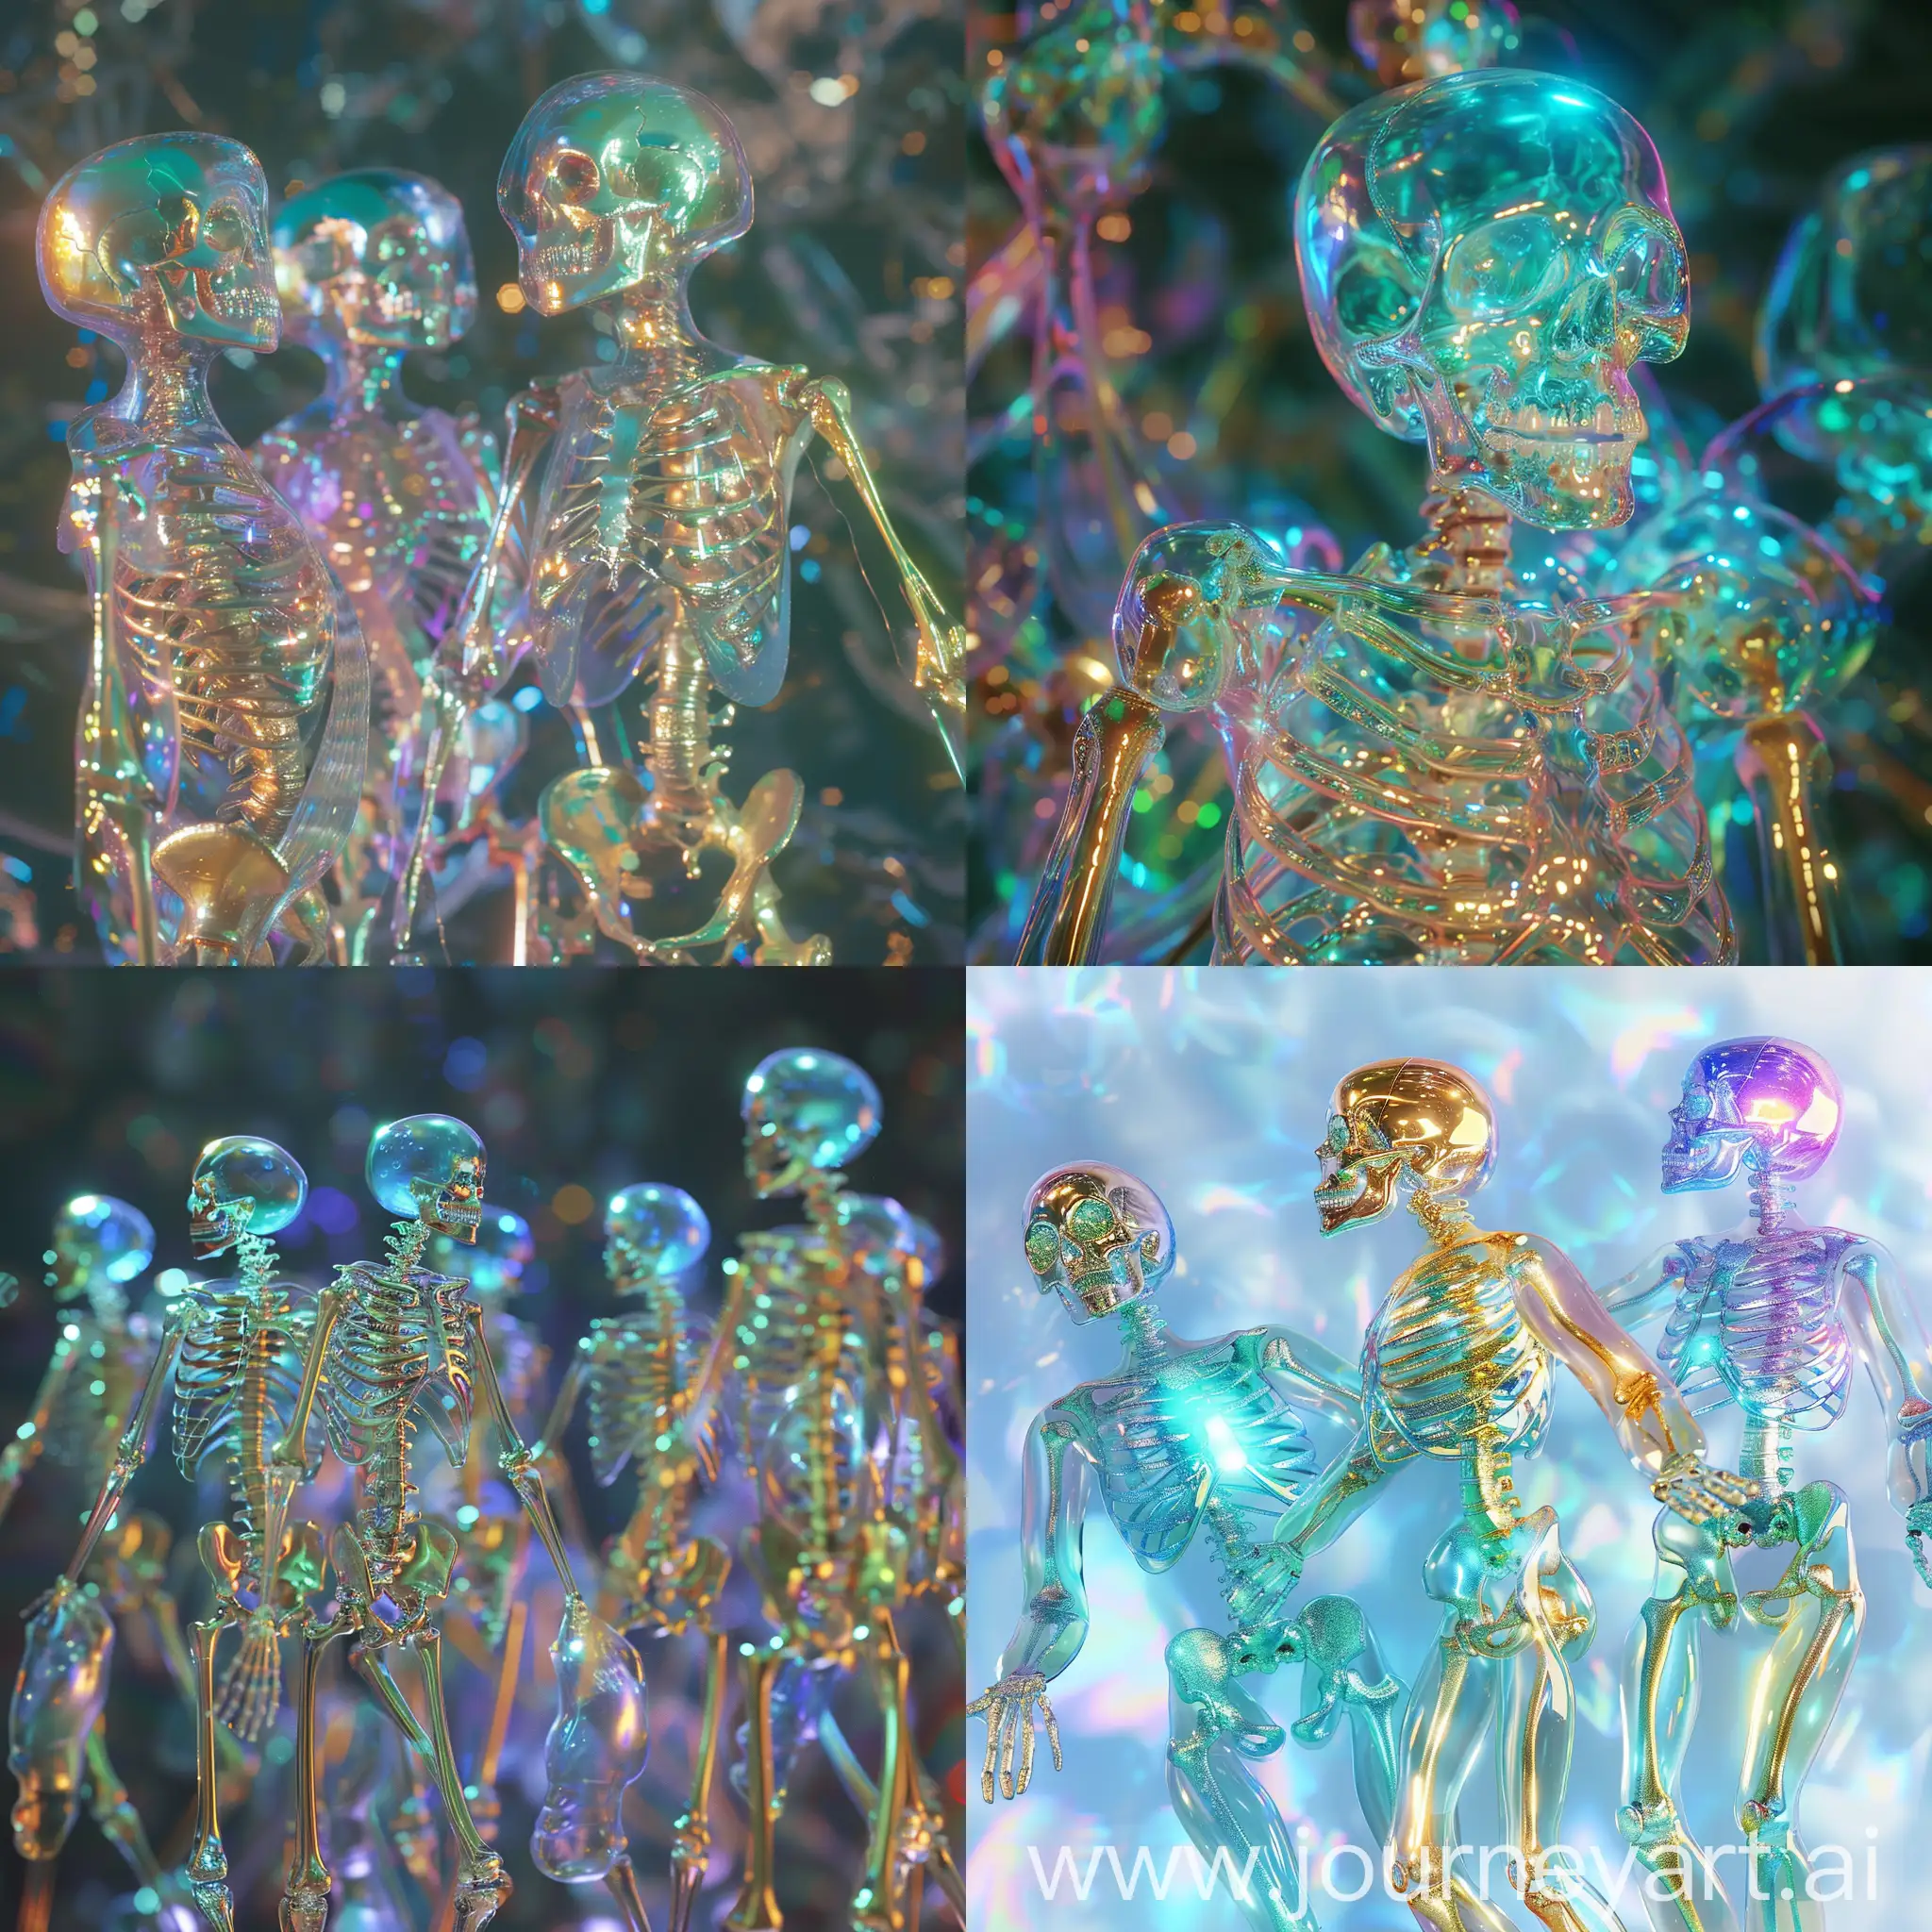 Enchanting-Teenagers-with-Translucent-Amphibian-Jelly-Humanoid-Children